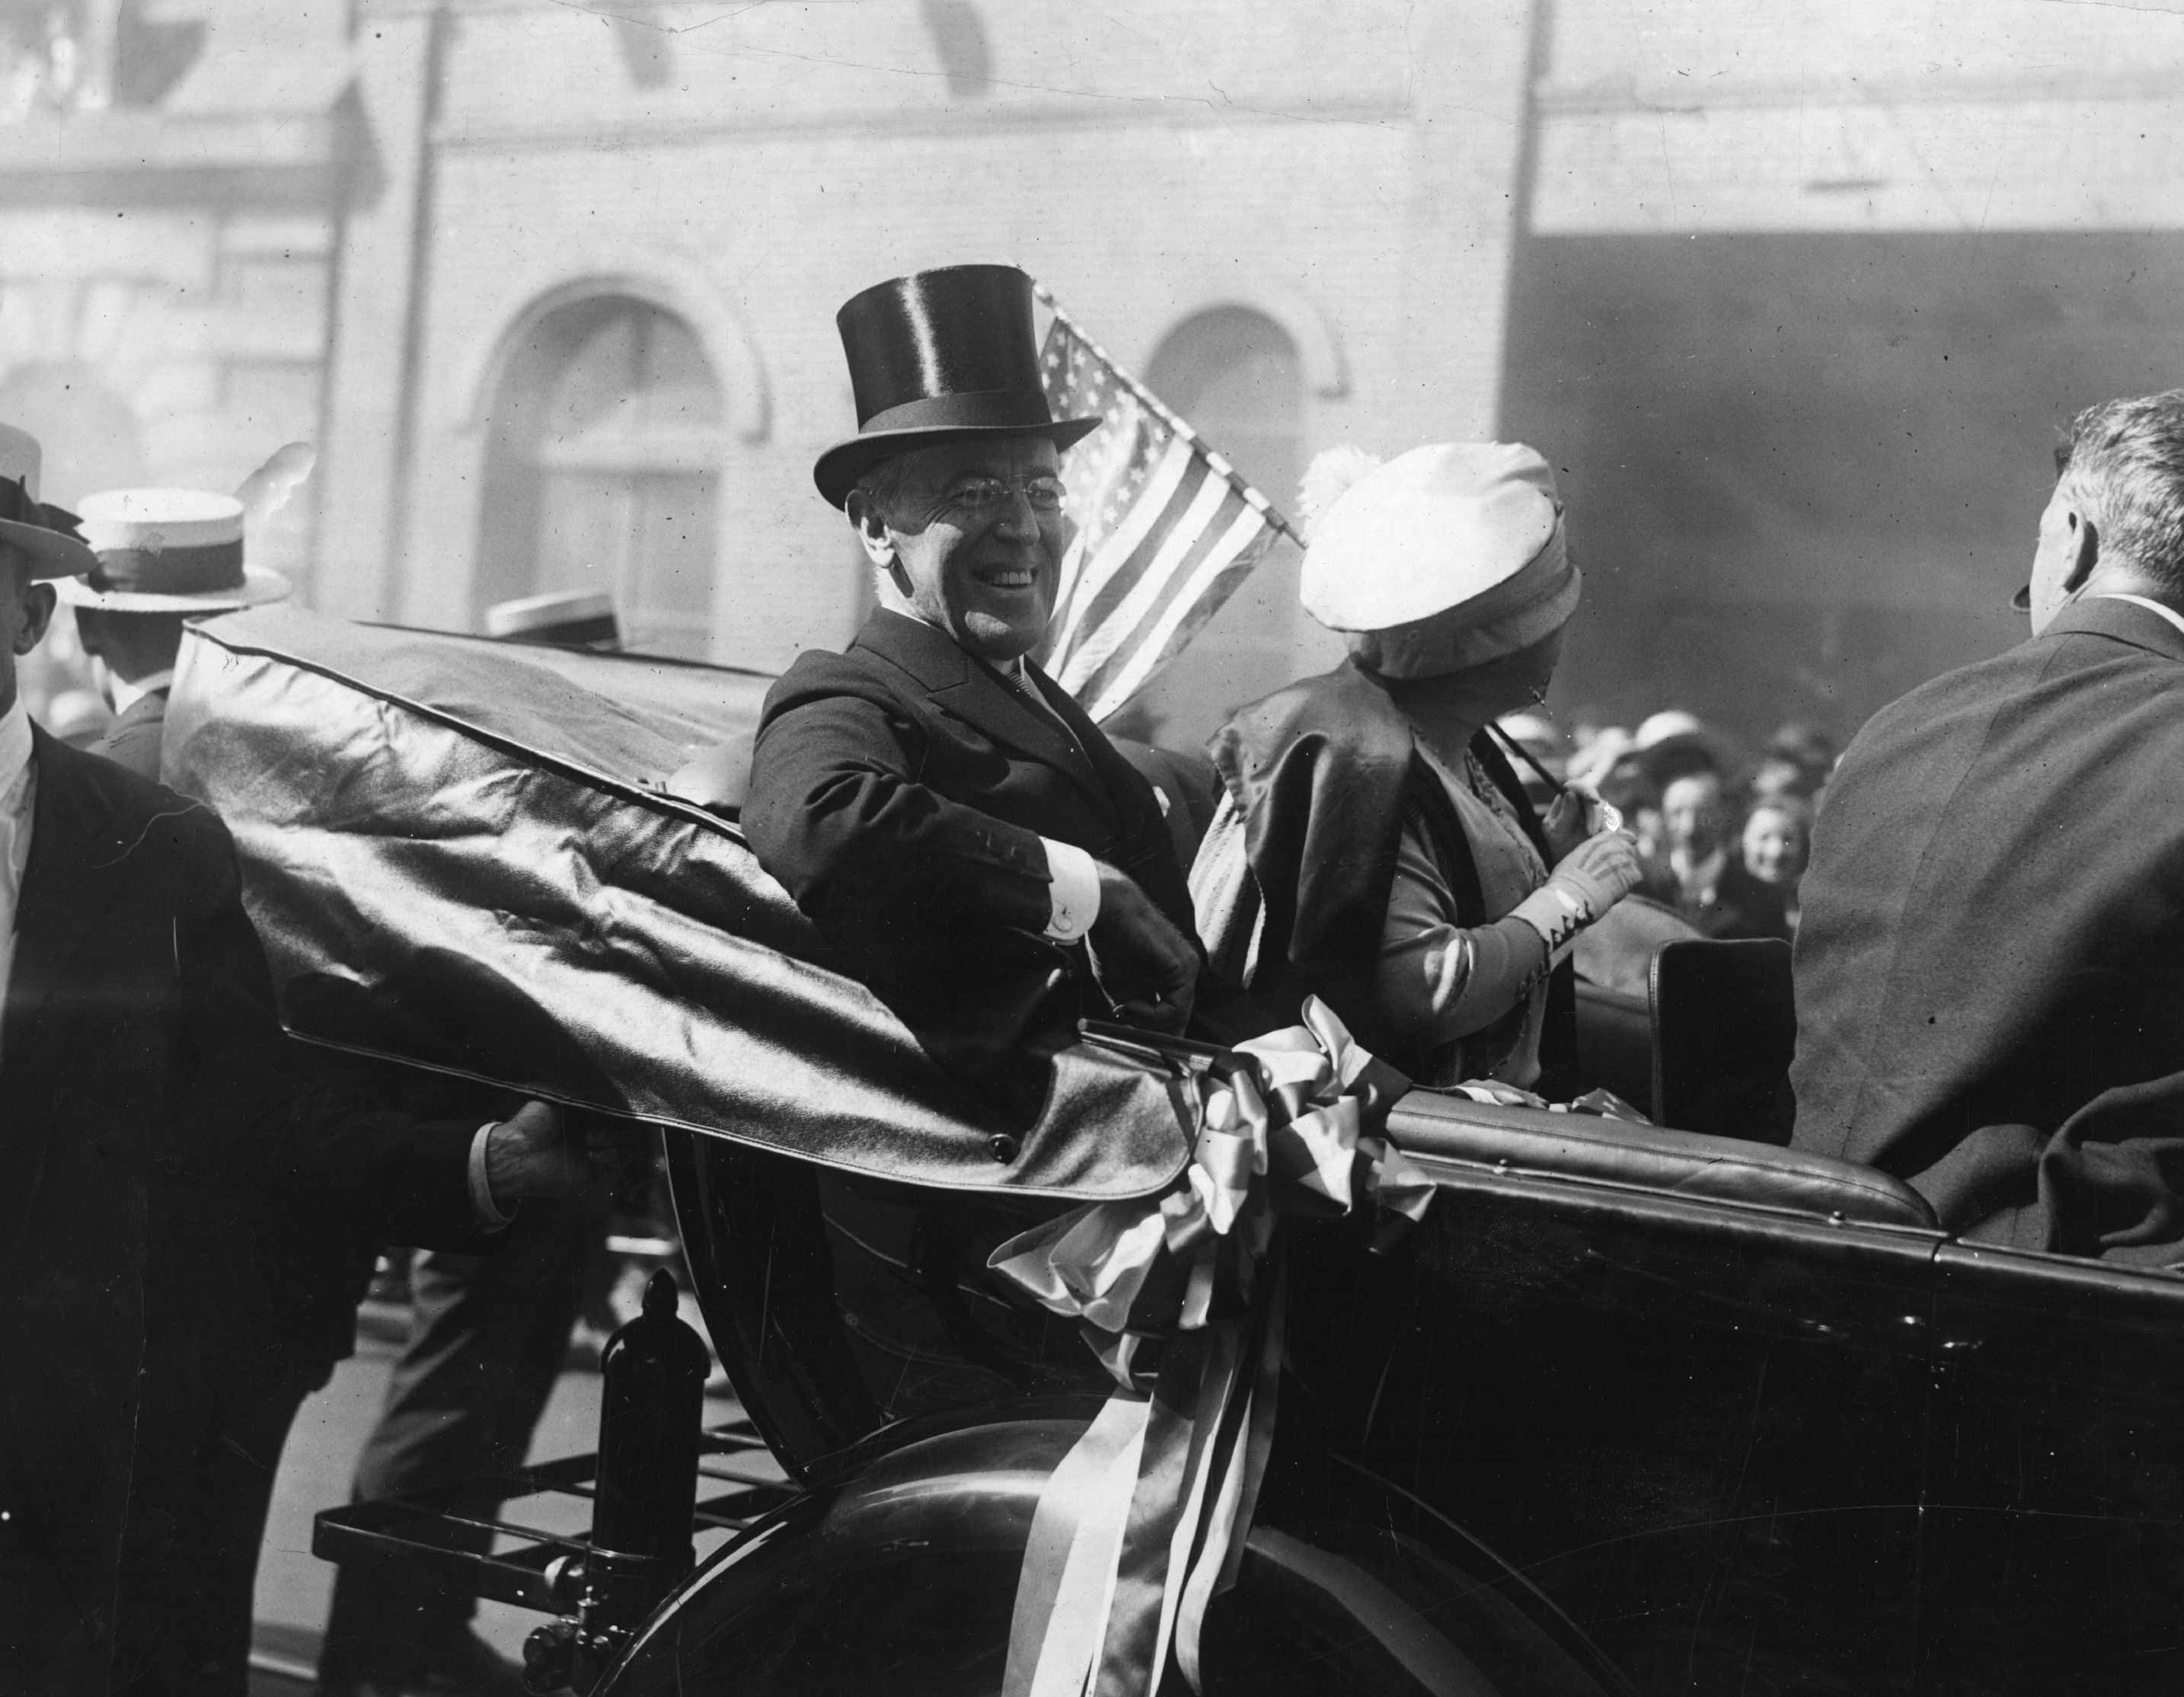 President Woodrow Wilson with the First Lady, Edith Wilson, riding in a carriage in New York. (Hulton Archive/Getty Images)